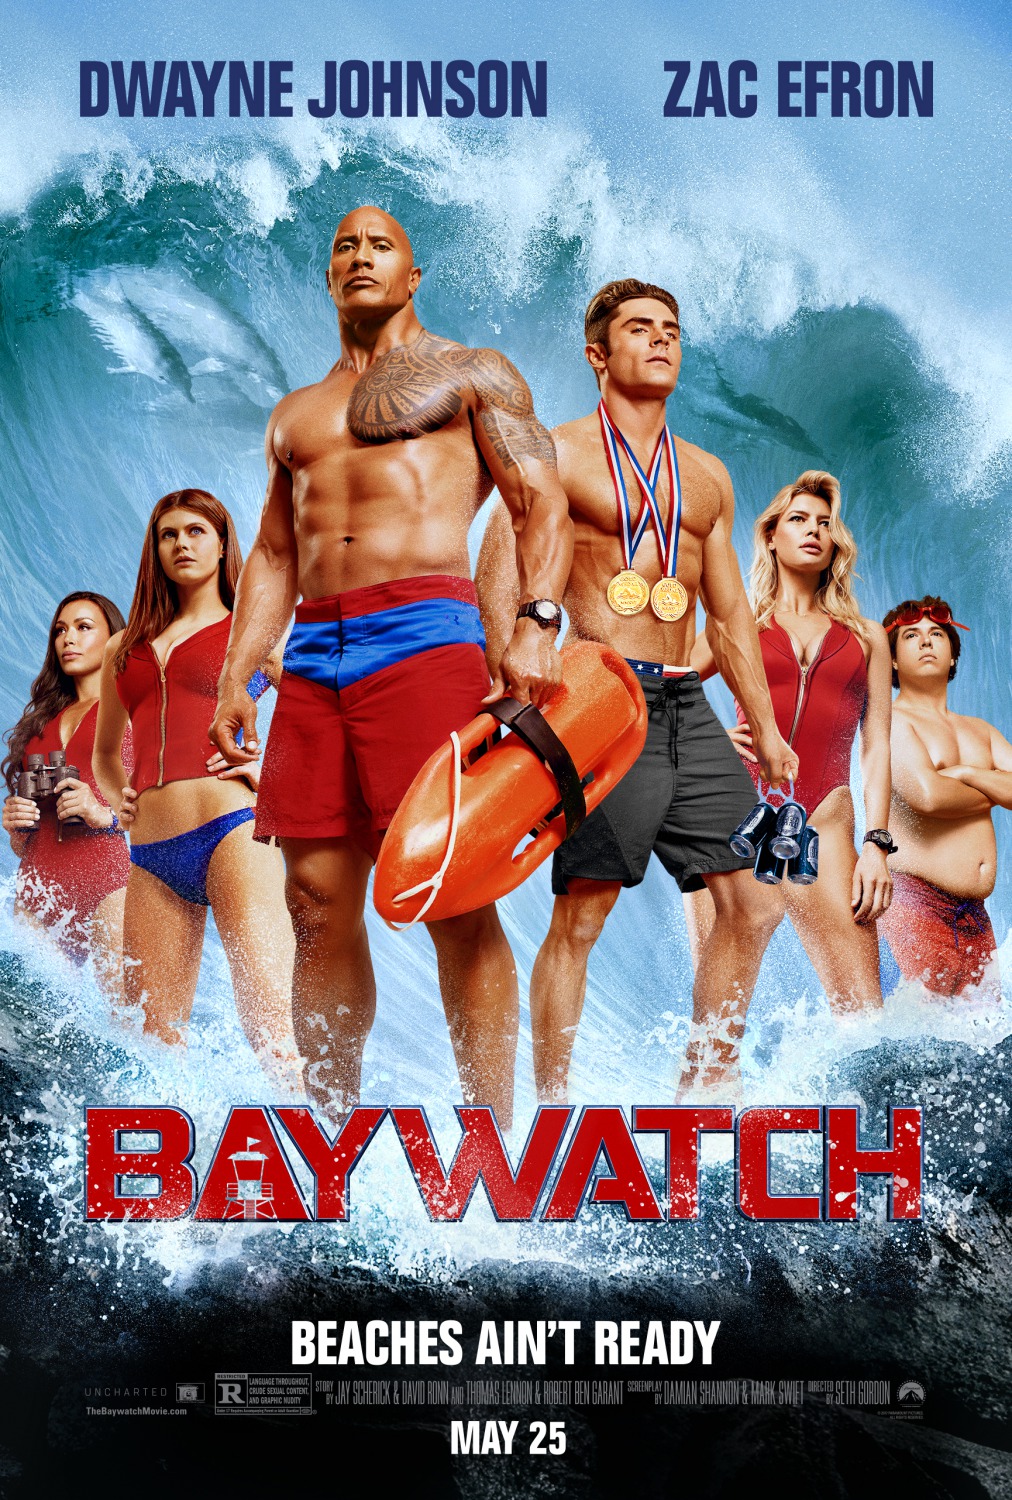 BAYWATCH (2017) - Trailers, Clips, Featurettes, Images and ...